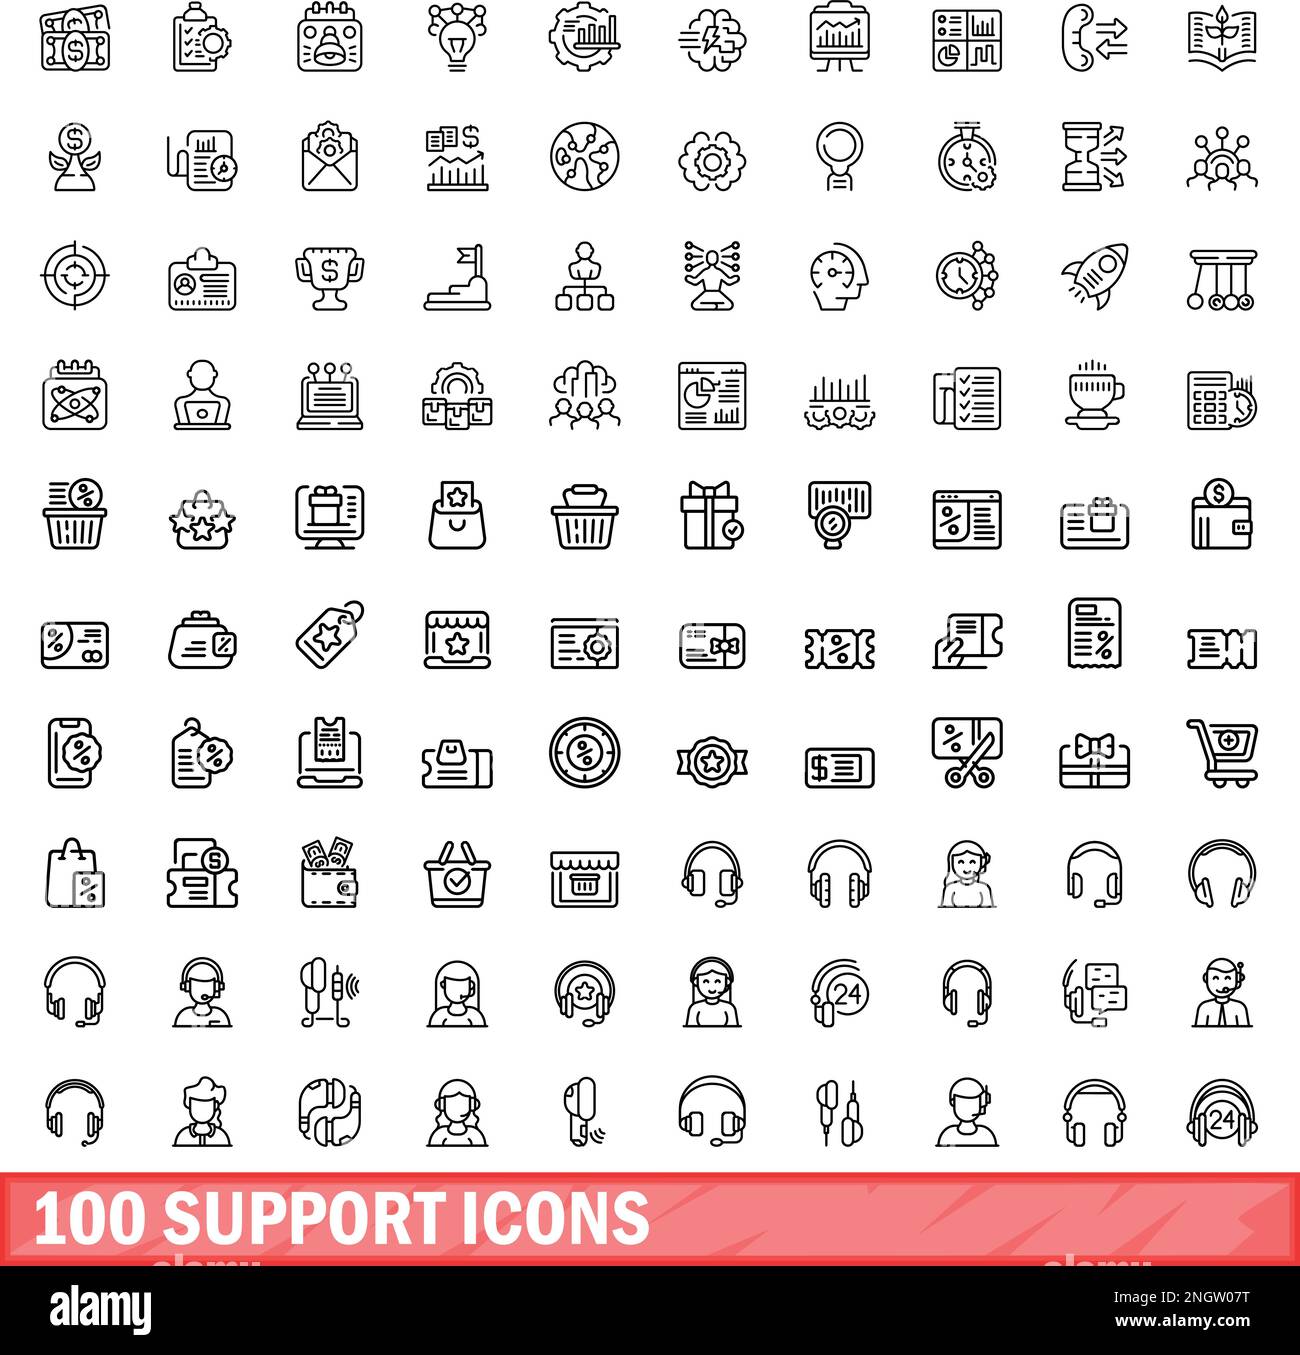 100 support icons set. Outline illustration of 100 support icons vector set isolated on white background Stock Vector